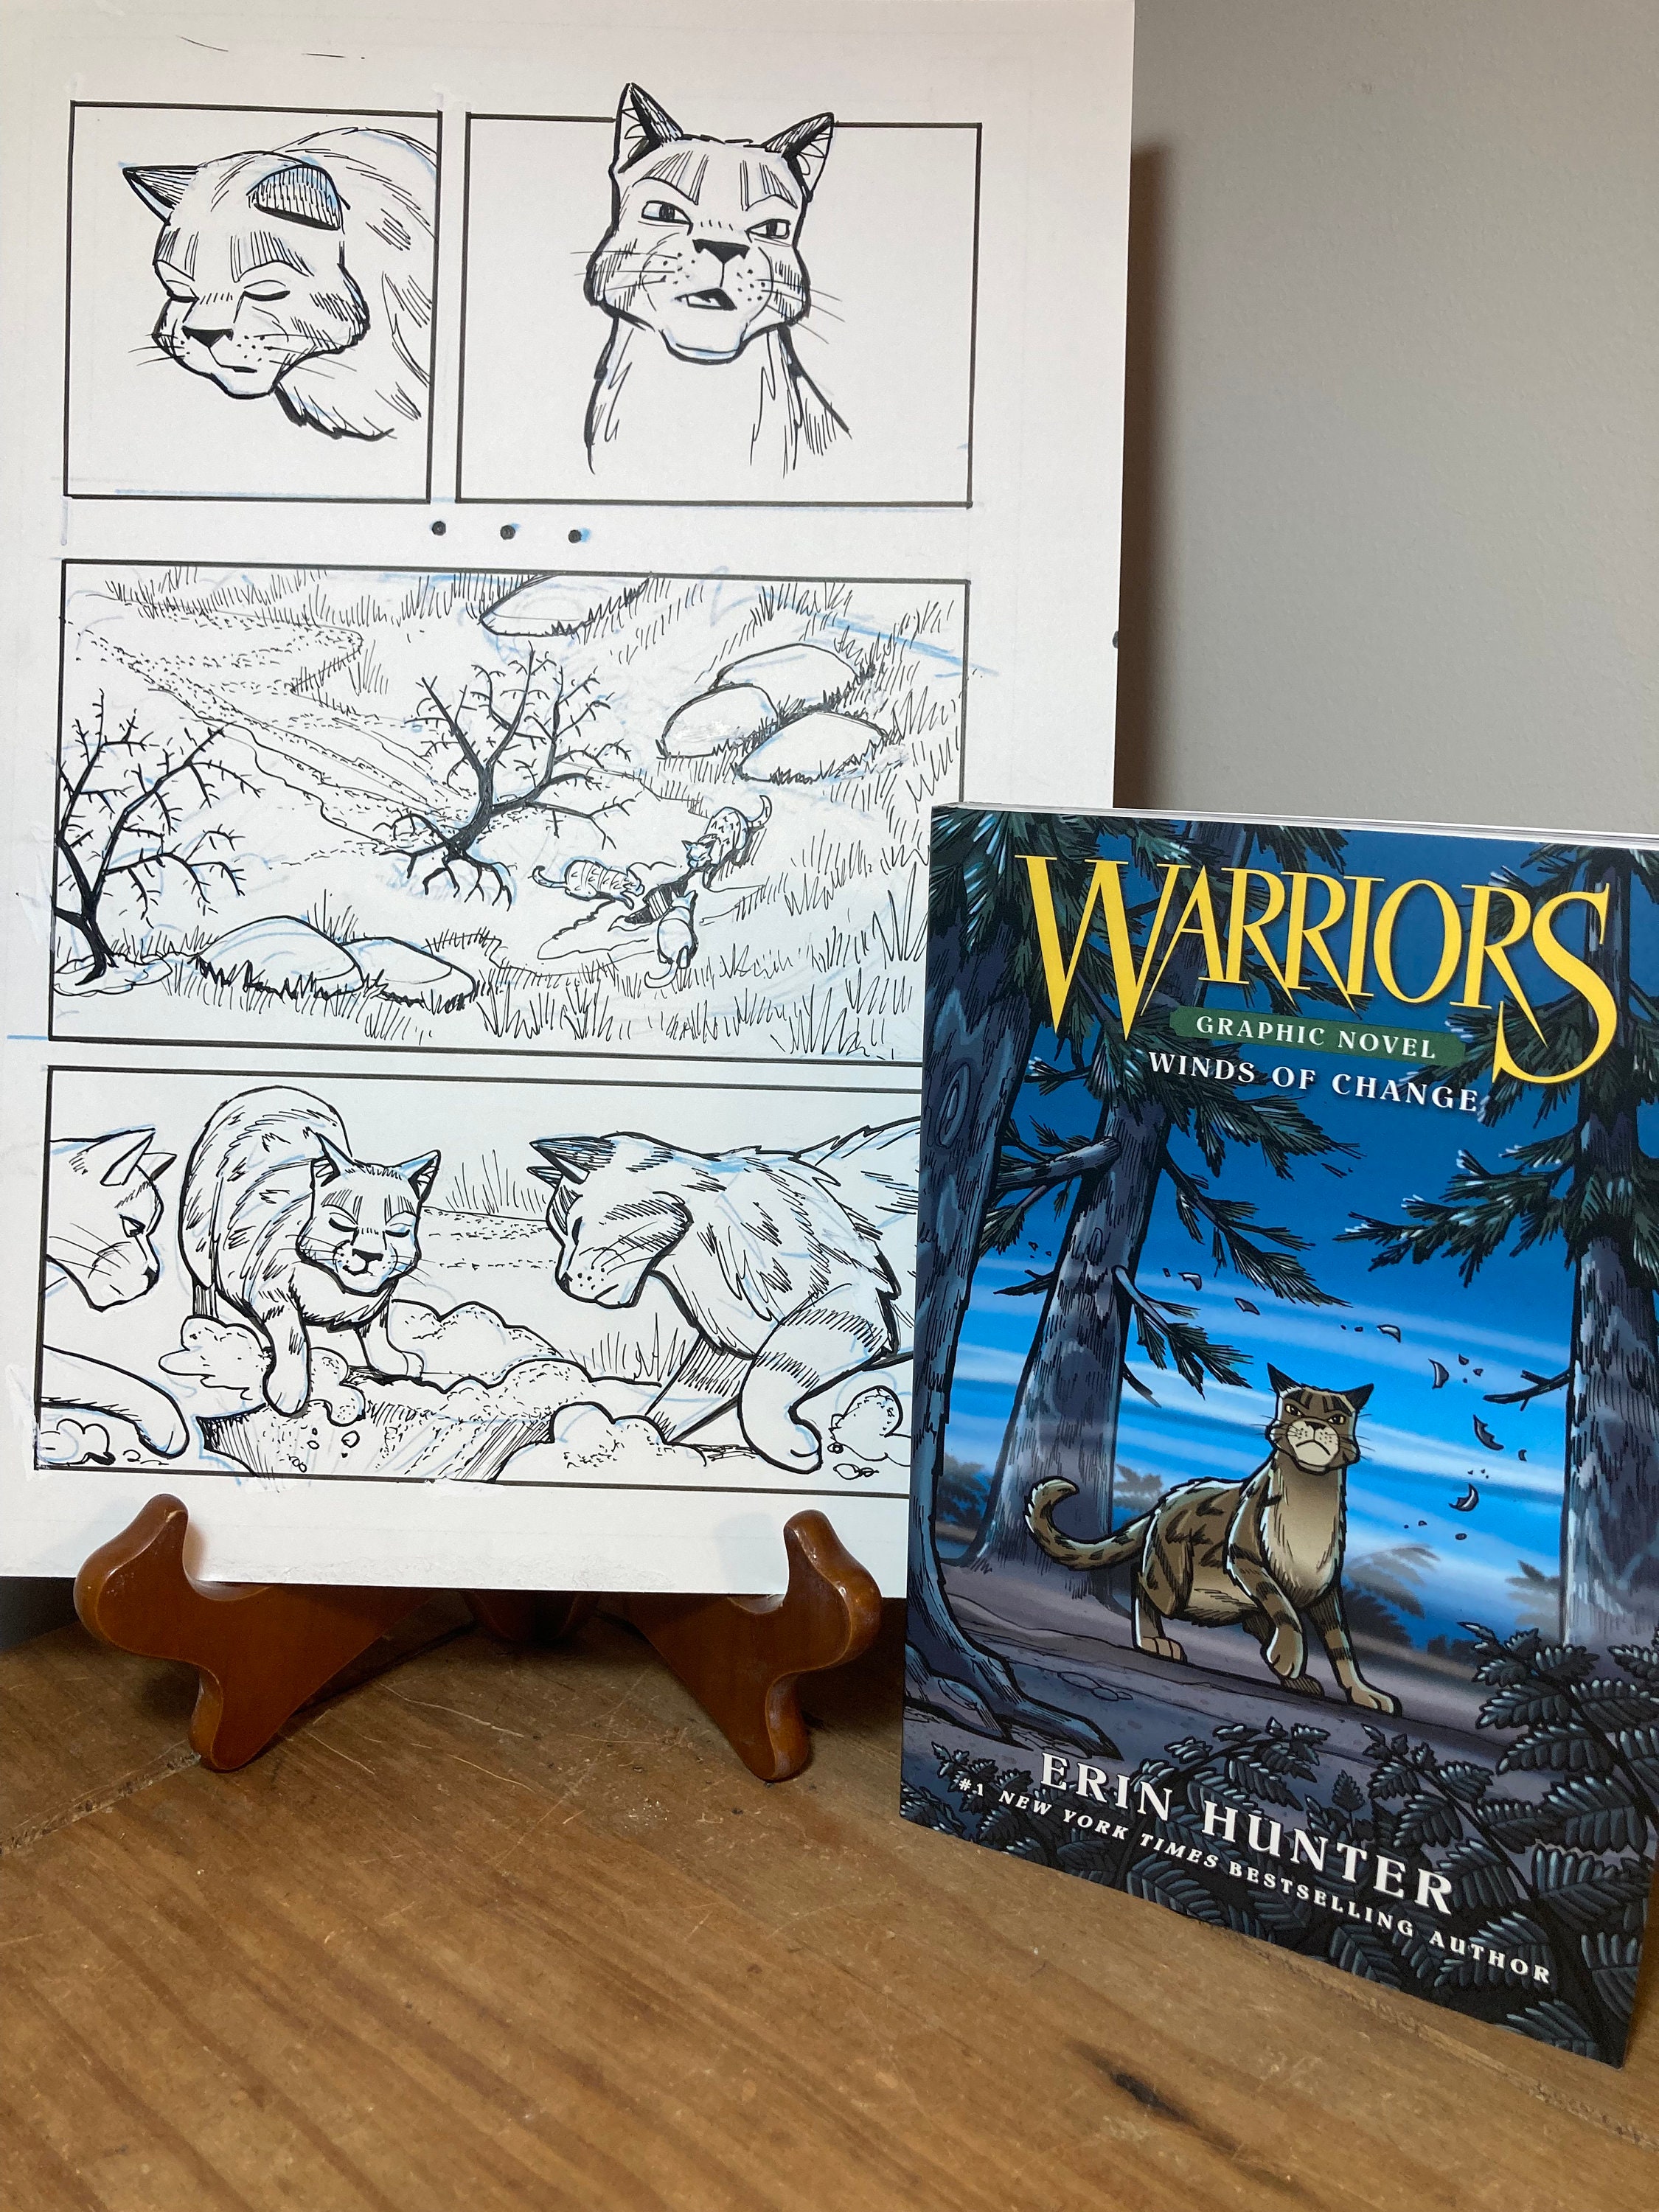 All the Warriors Graphic Novel Books in Order